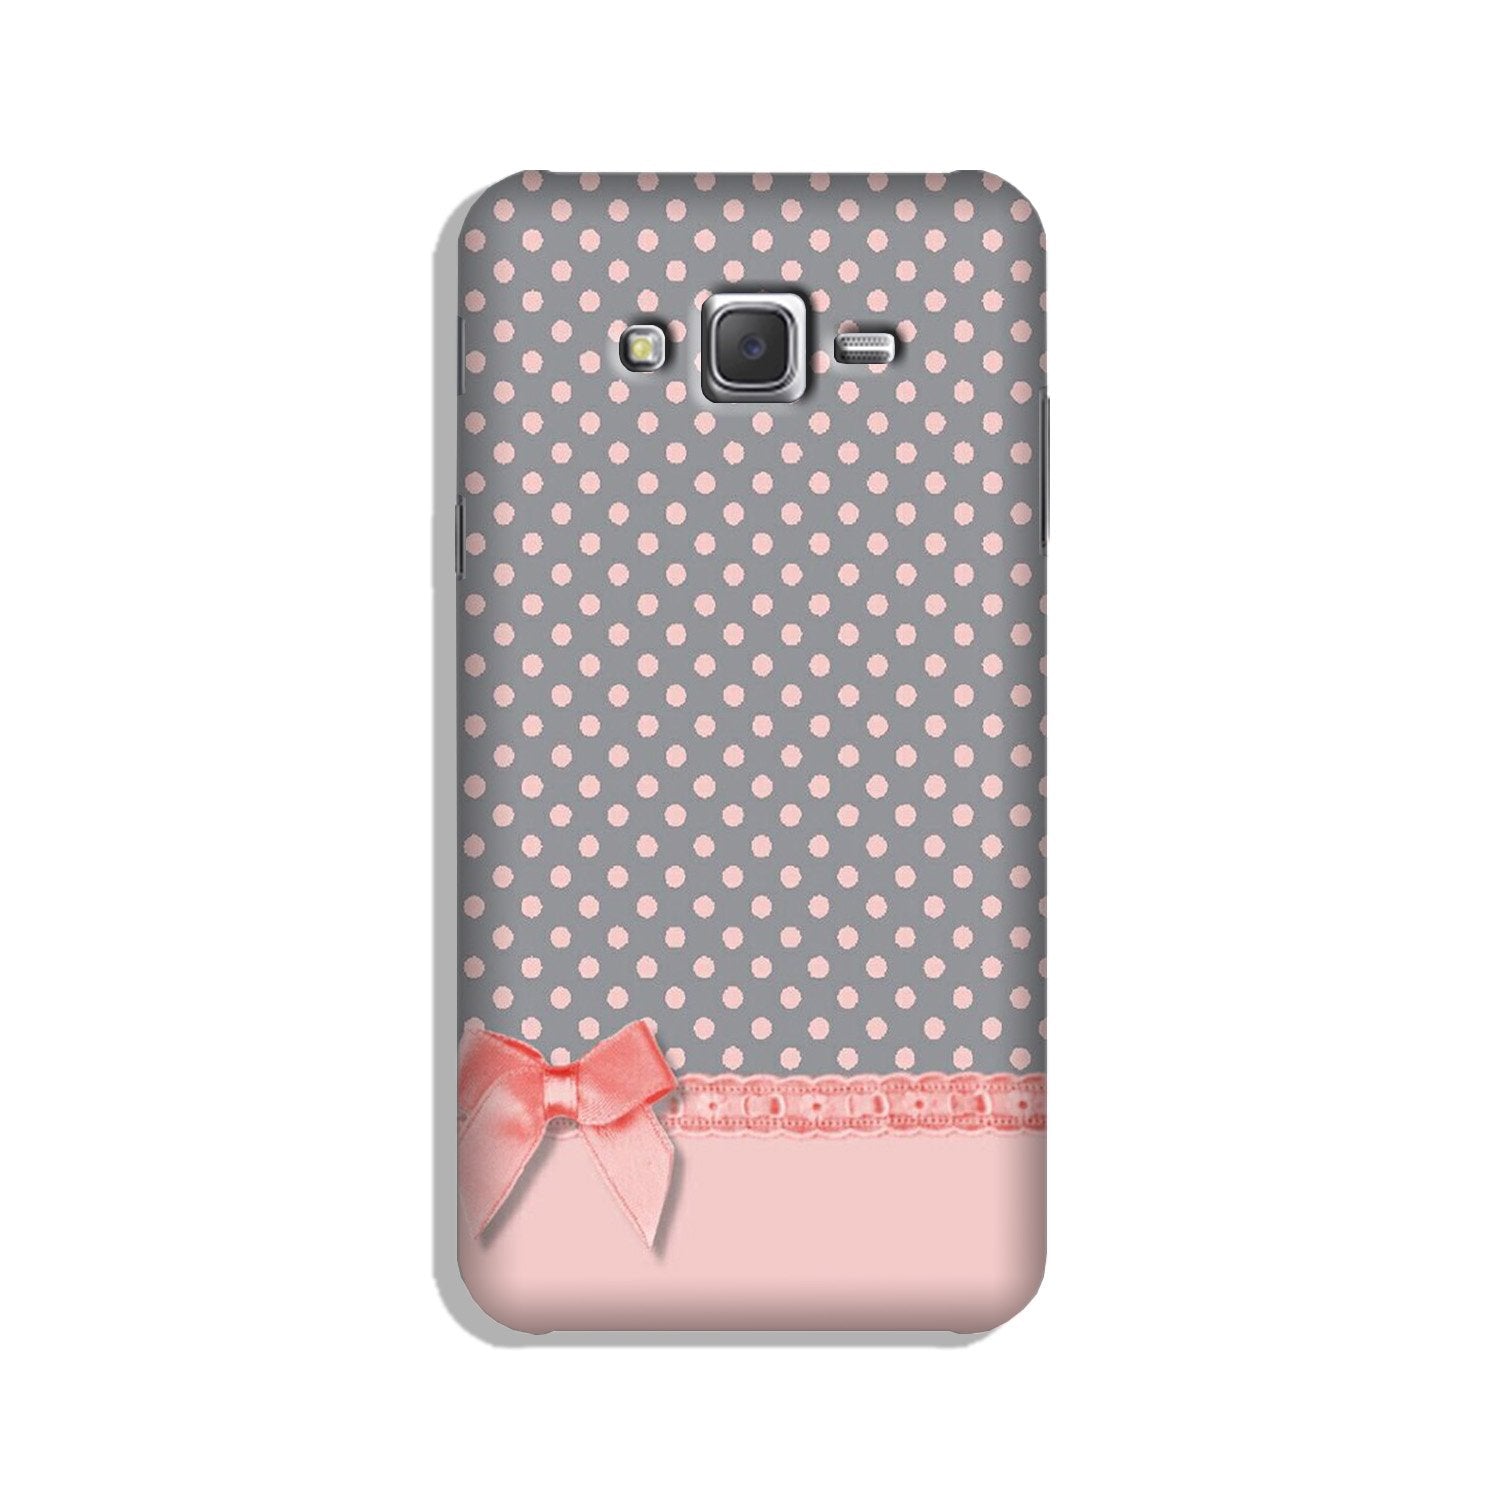 Gift Wrap2 Case for Galaxy J5 (2015)